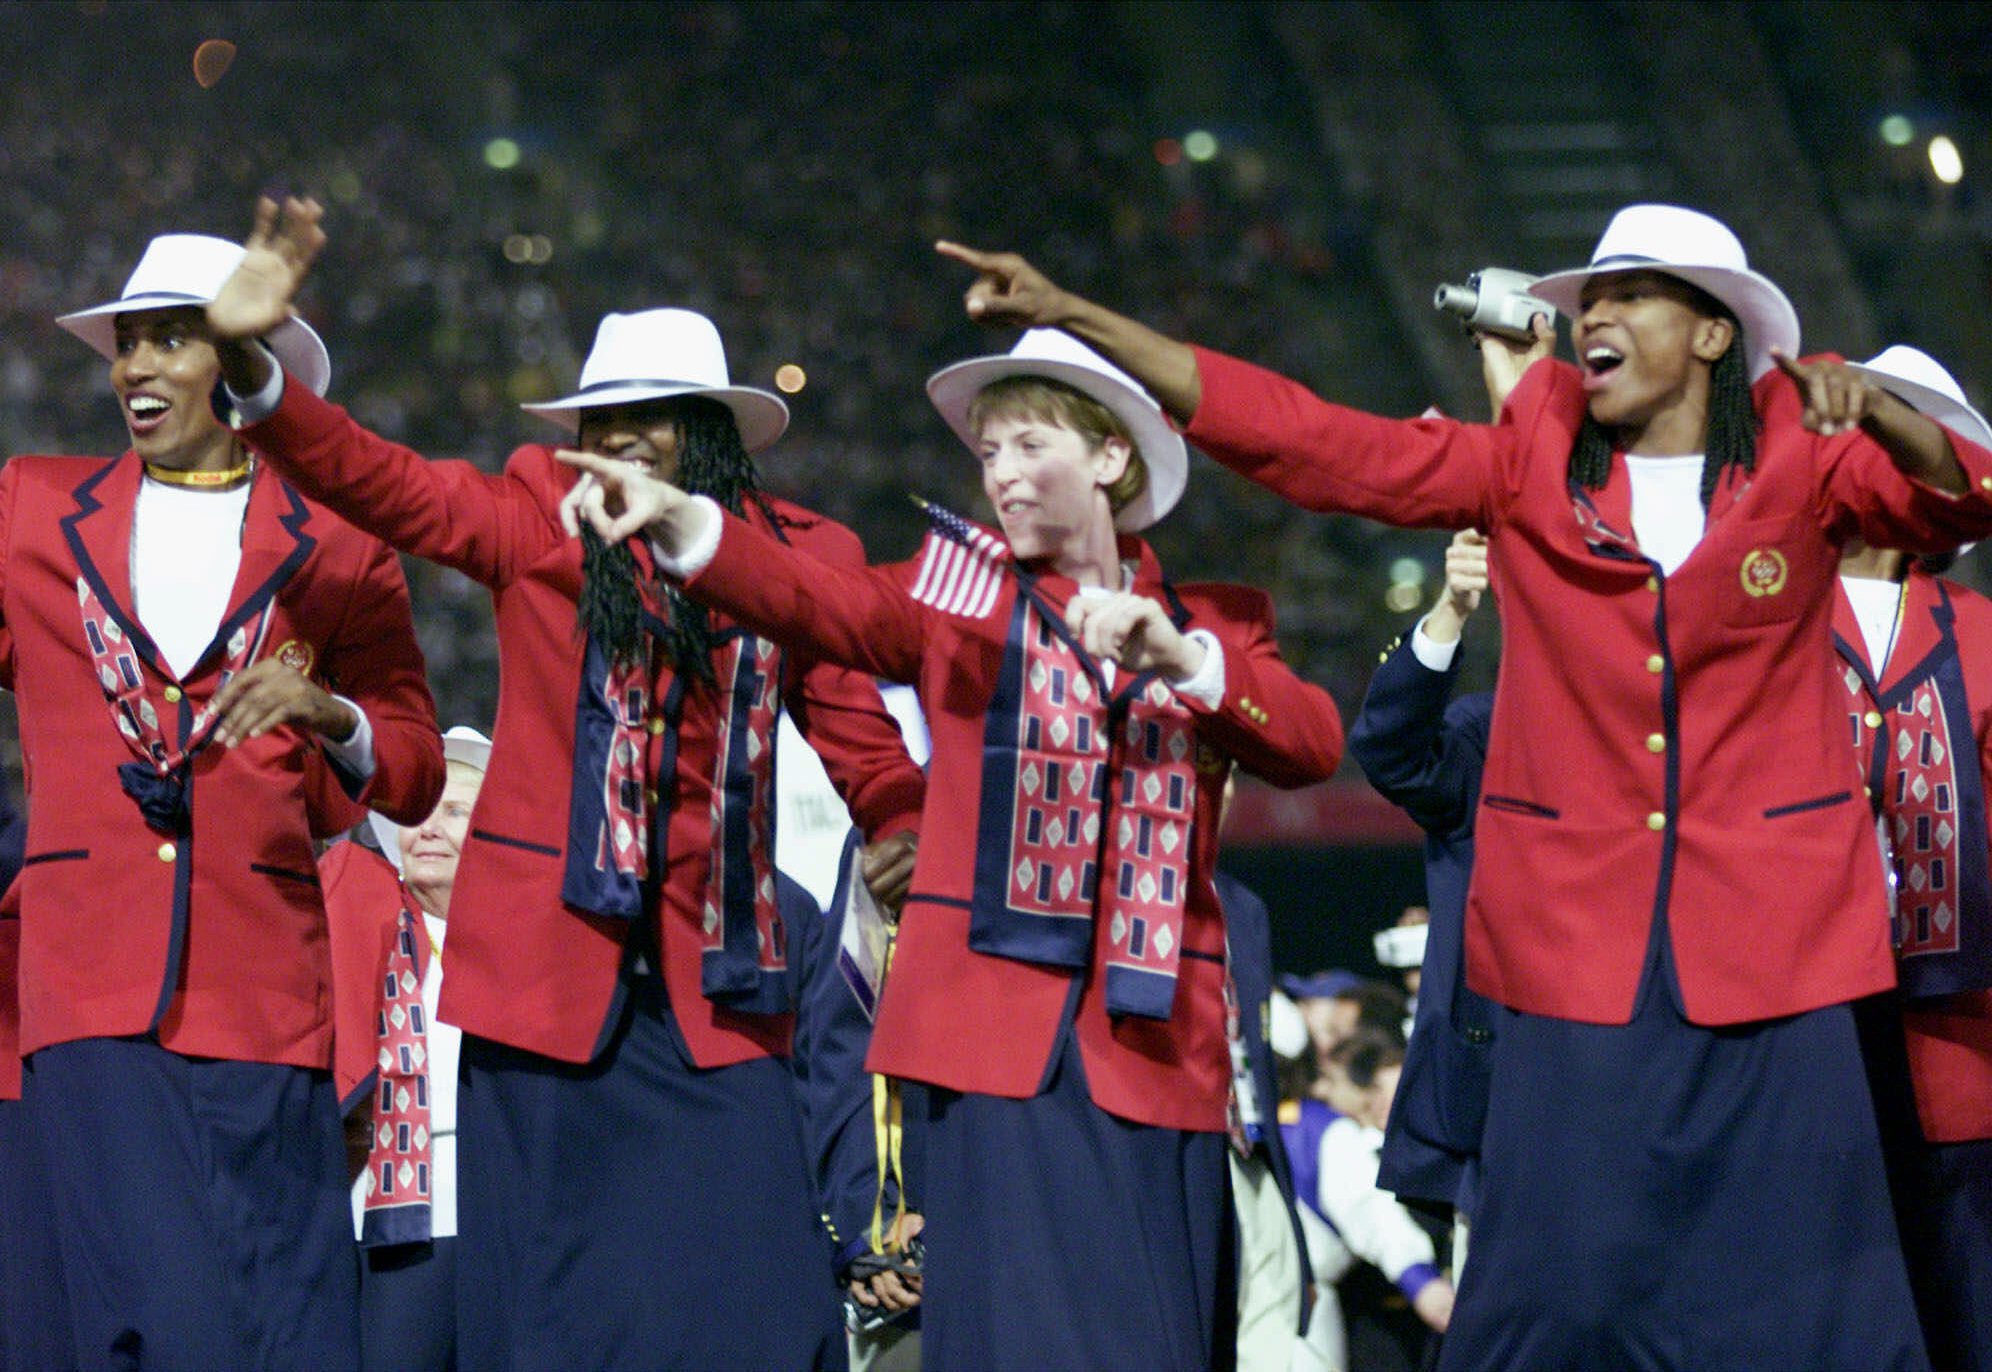 Members of the USA women's basketball team march onto the field during the opening ceremony for the Summer Olympics Friday, Sept. 15, 2000, at Olympic Stadium in Sydney. (AP Photo/David Guttenfelder)